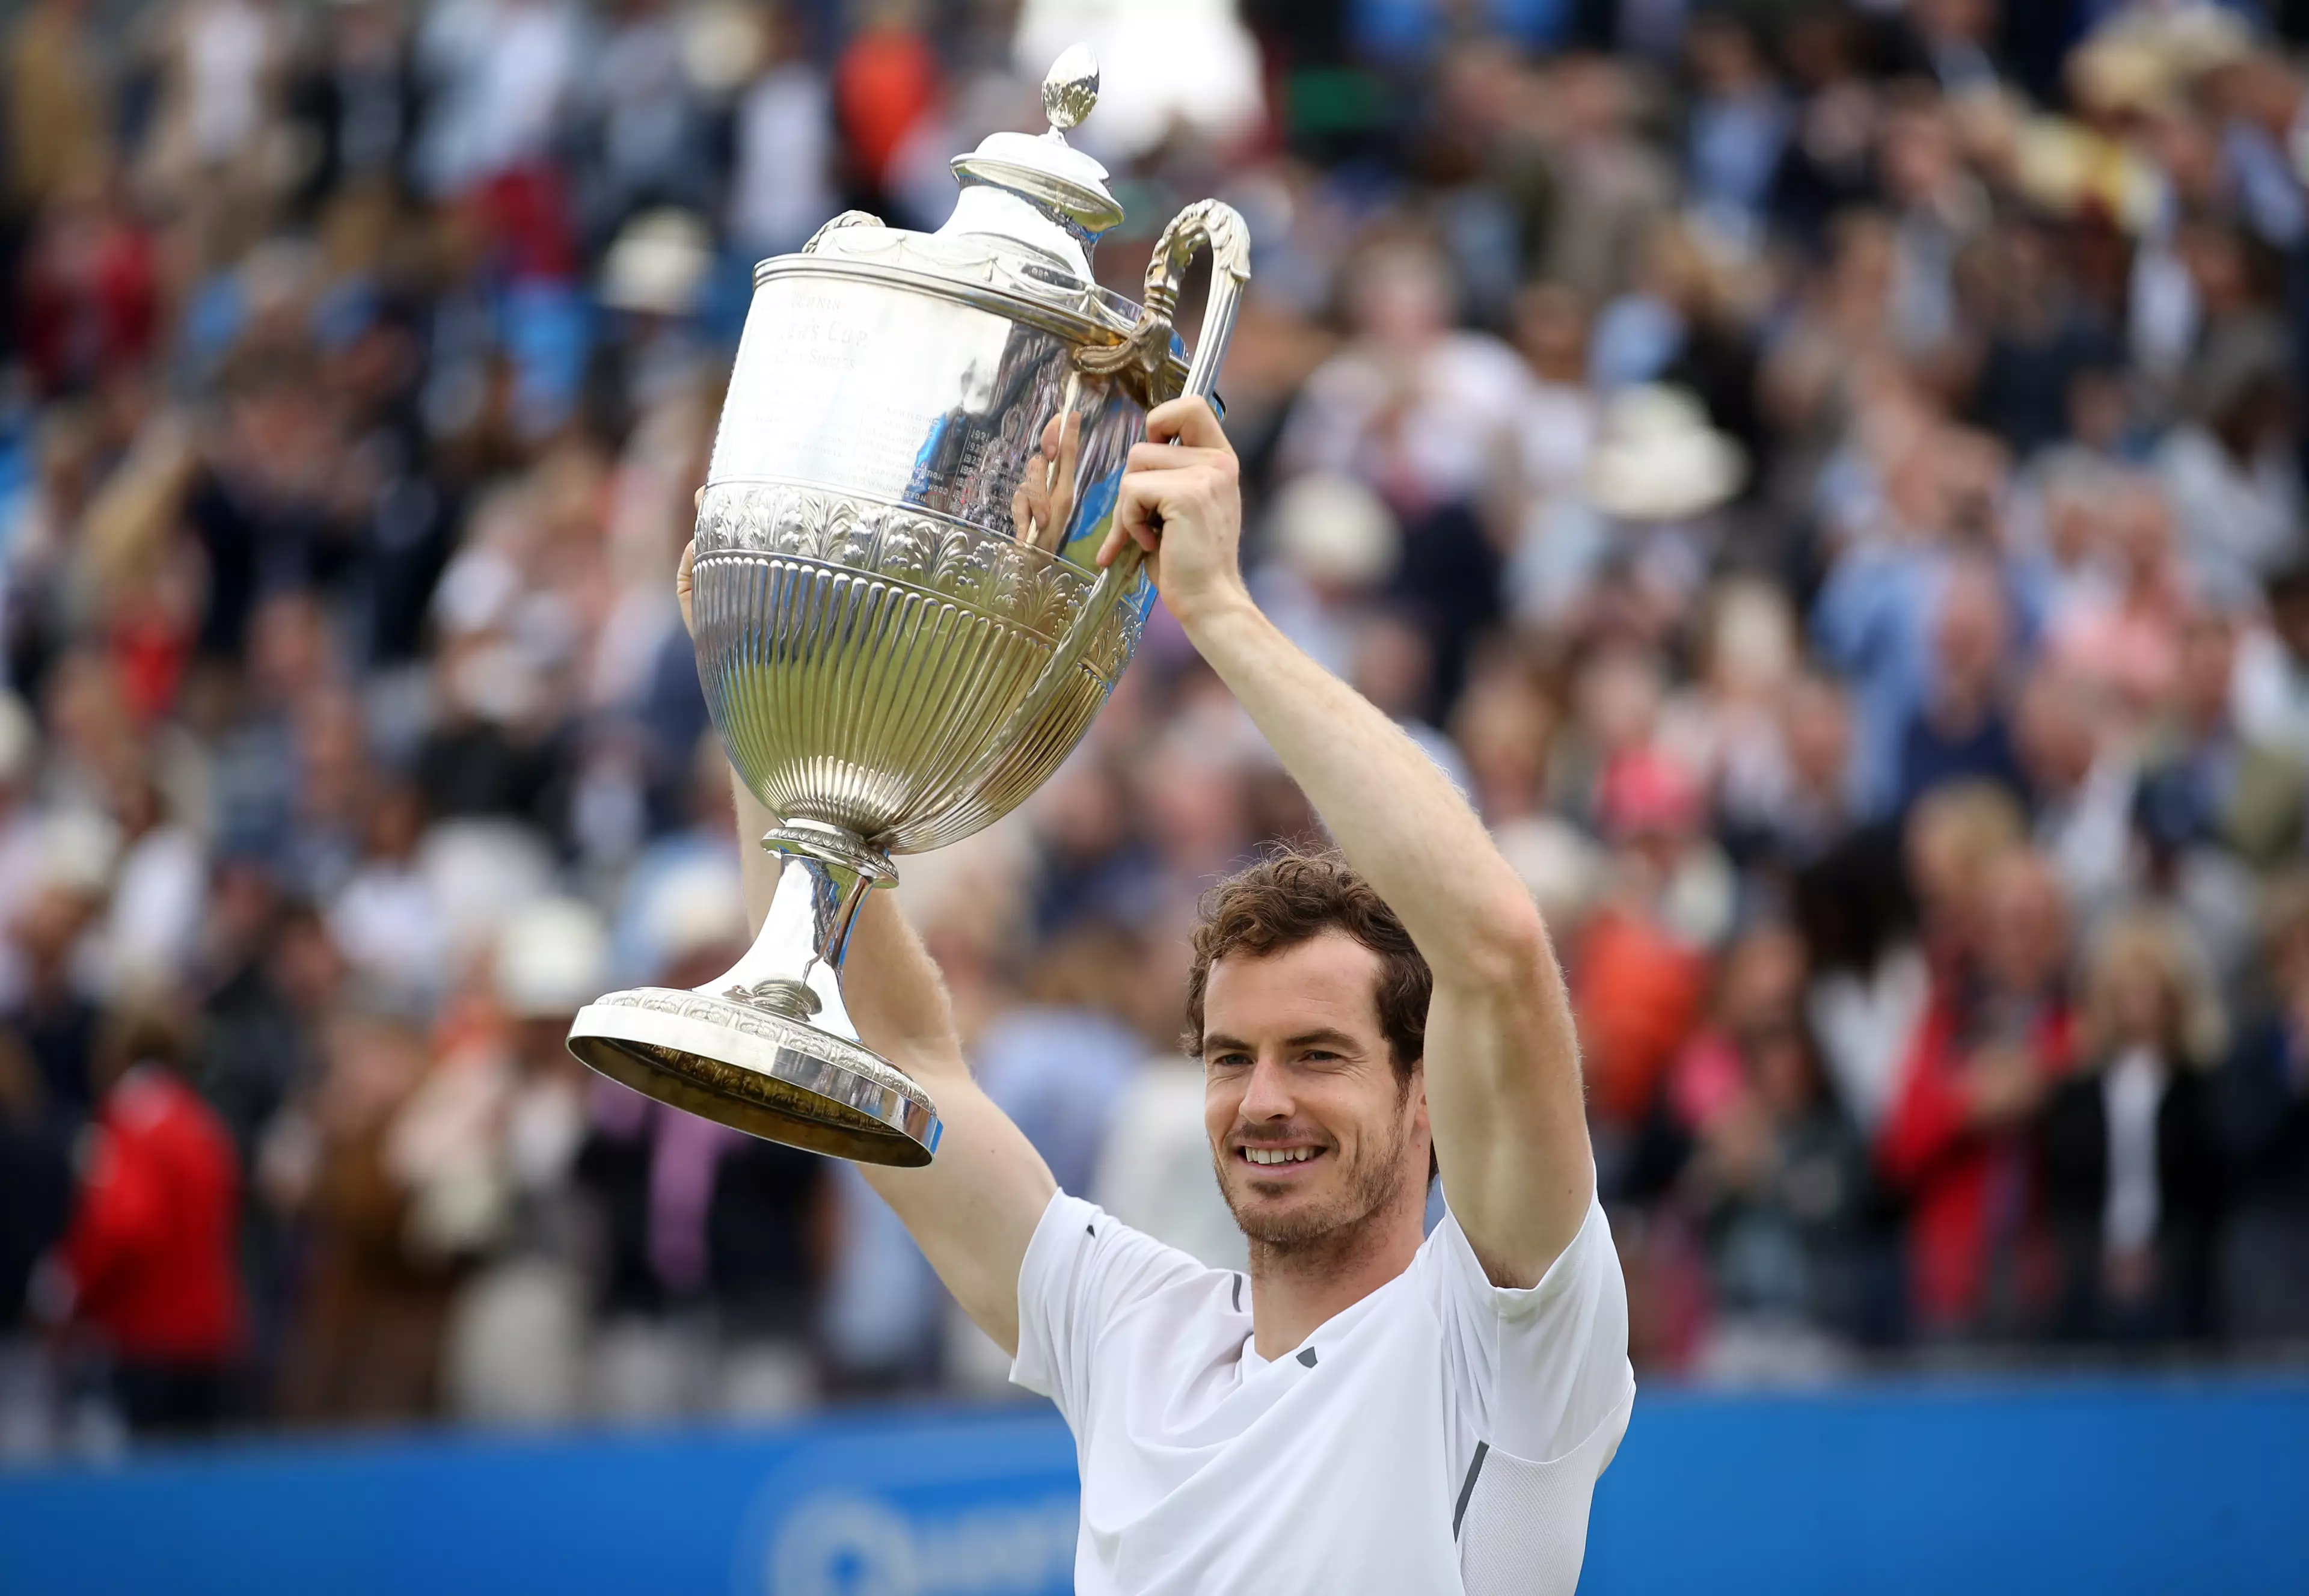 Murray has won at Queen's Club five times on his own. Image: PA Images